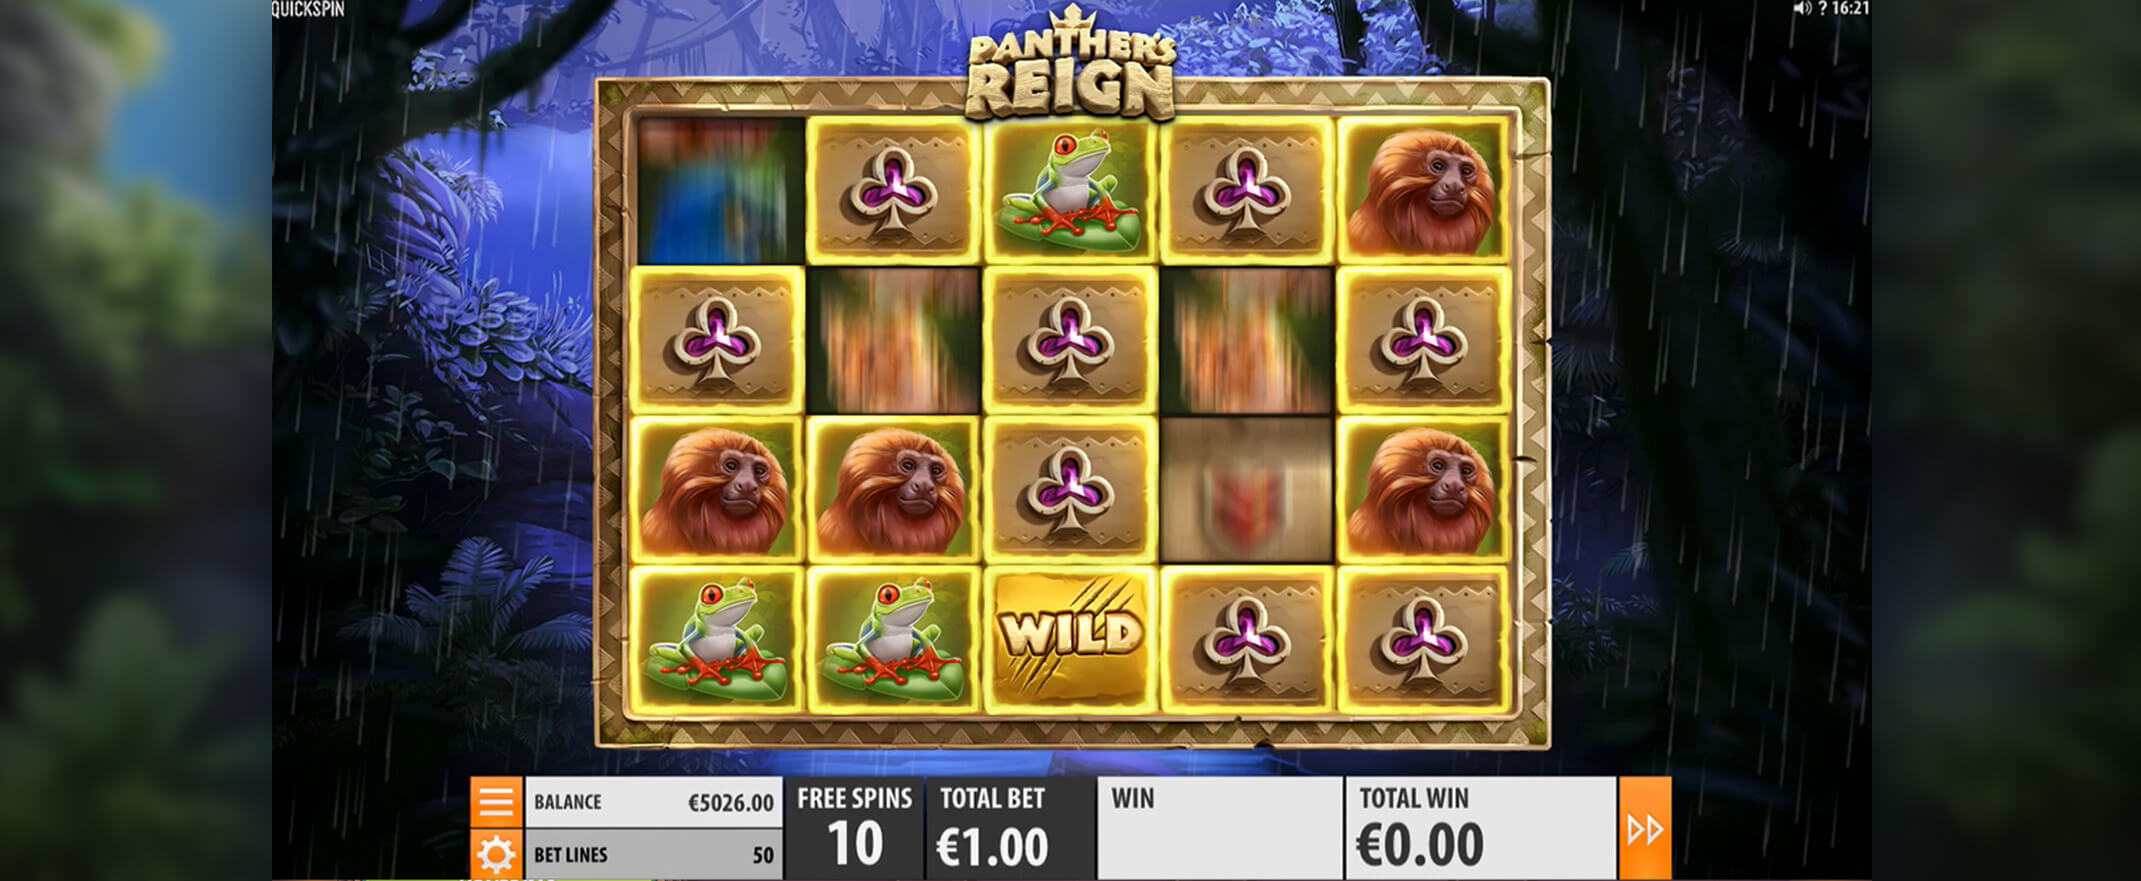 Panther's Reign Slot Review, image of the reels and symbols